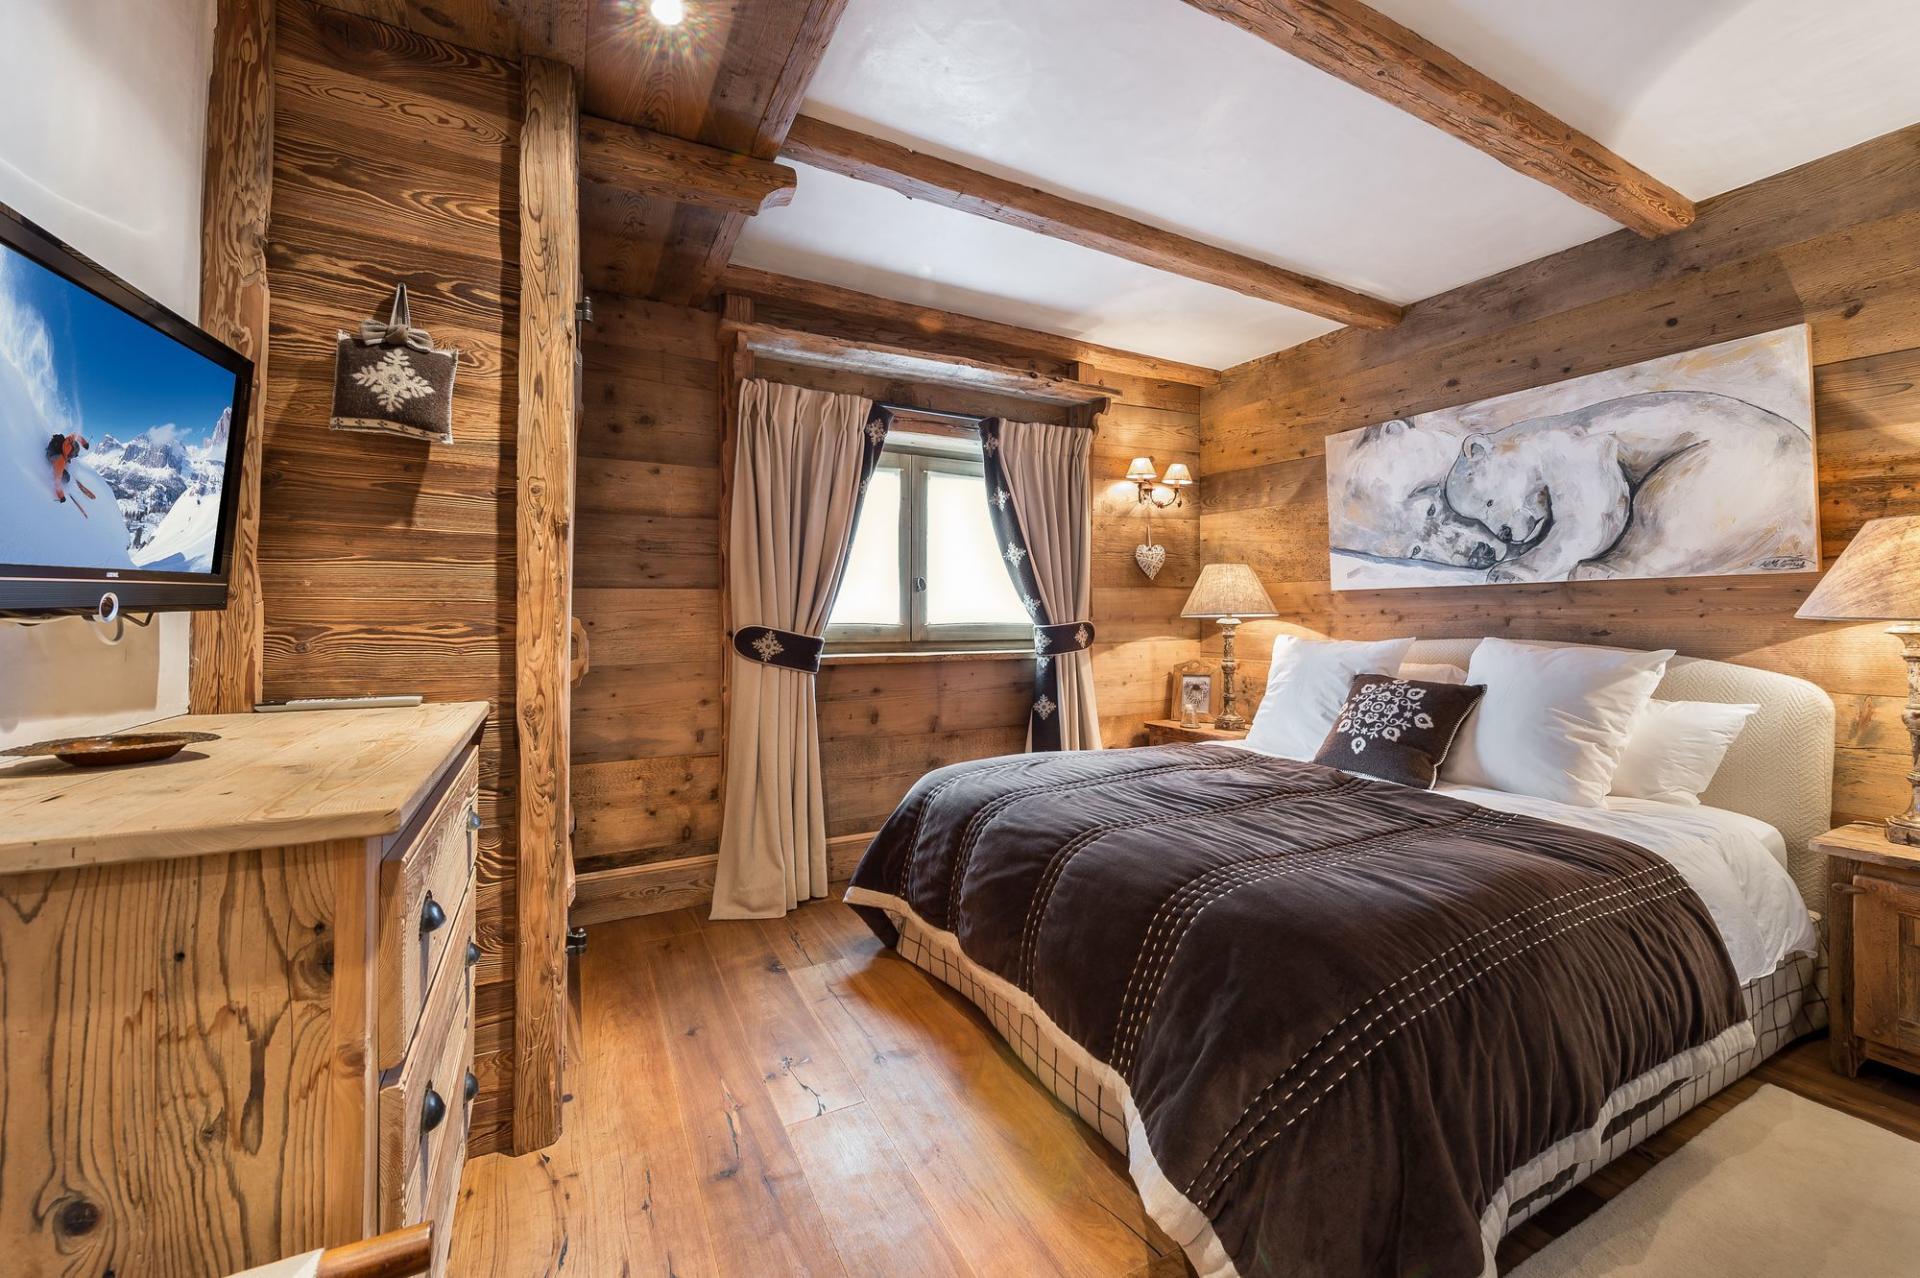 ONE OF THE BEDROOMS OF CHALET BELLECOTE SKI RENTAL